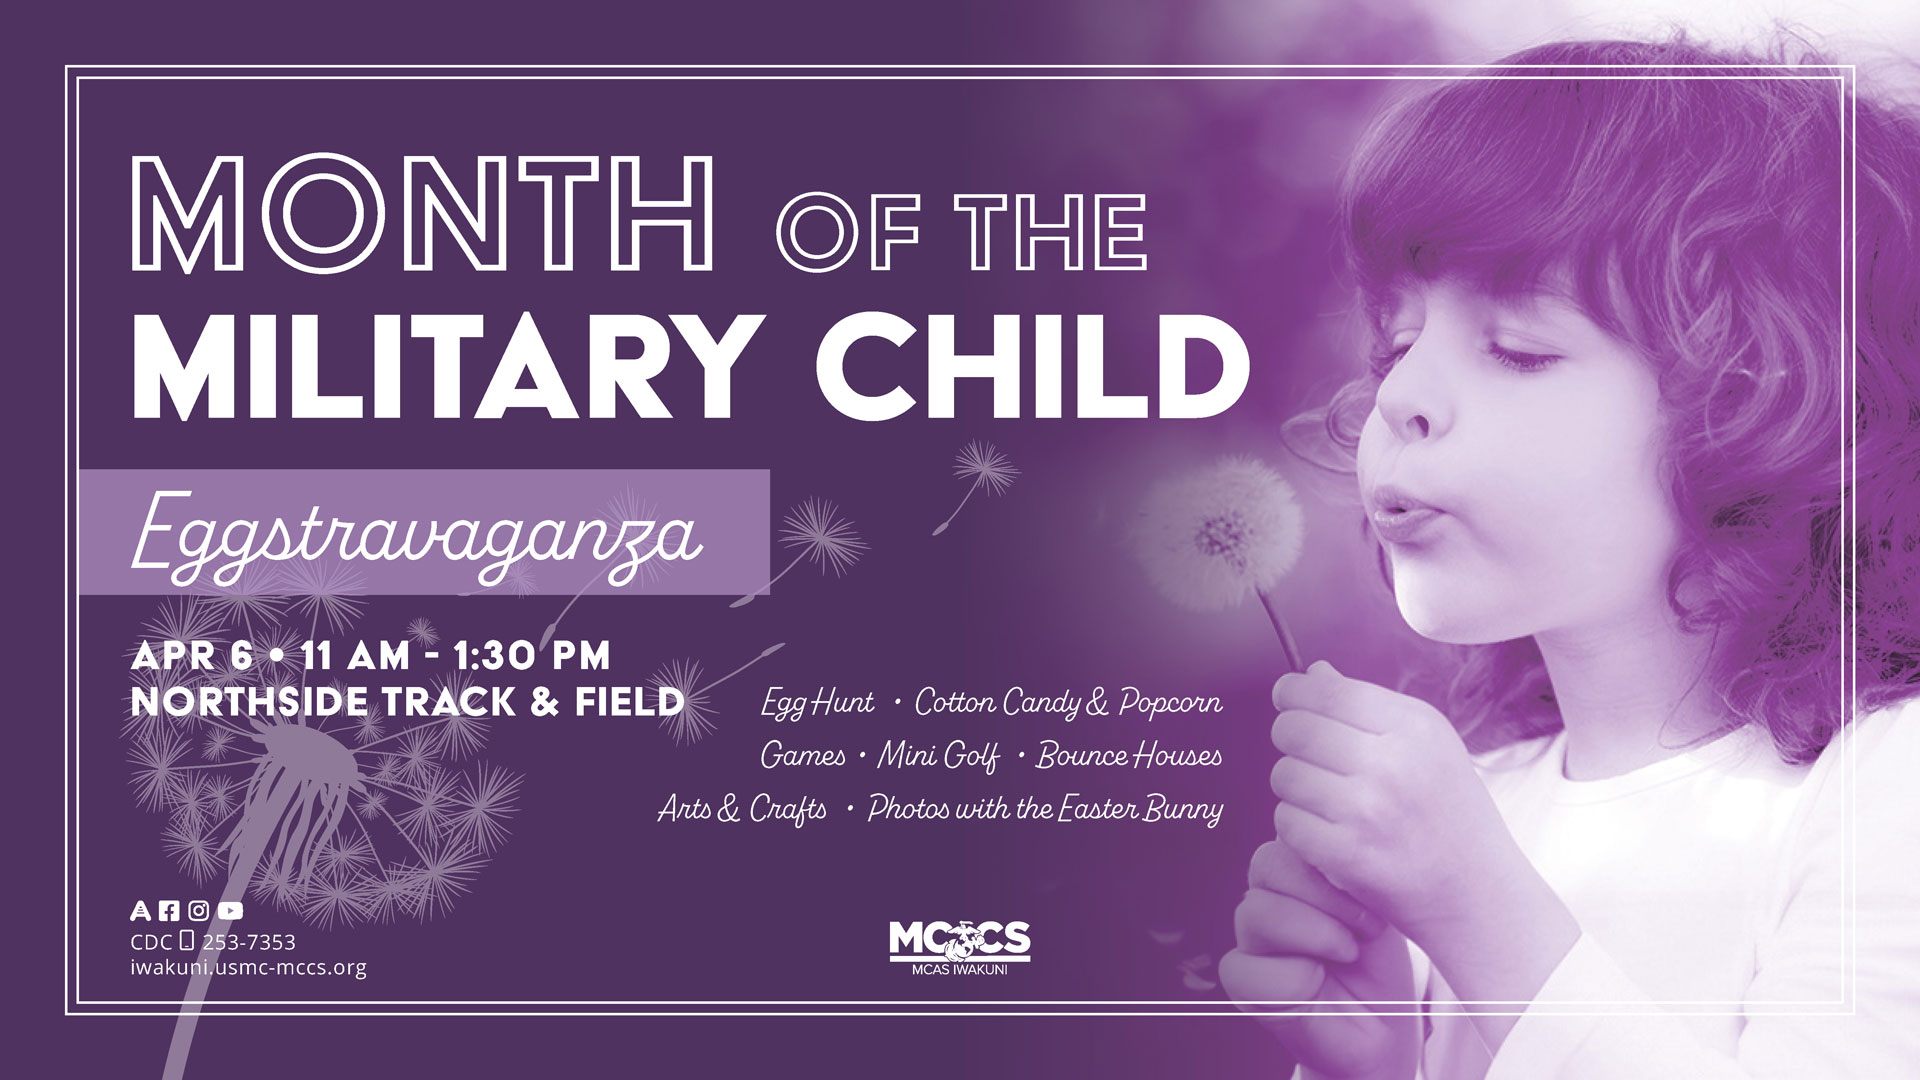 Month of the Military Child Eggstravaganza